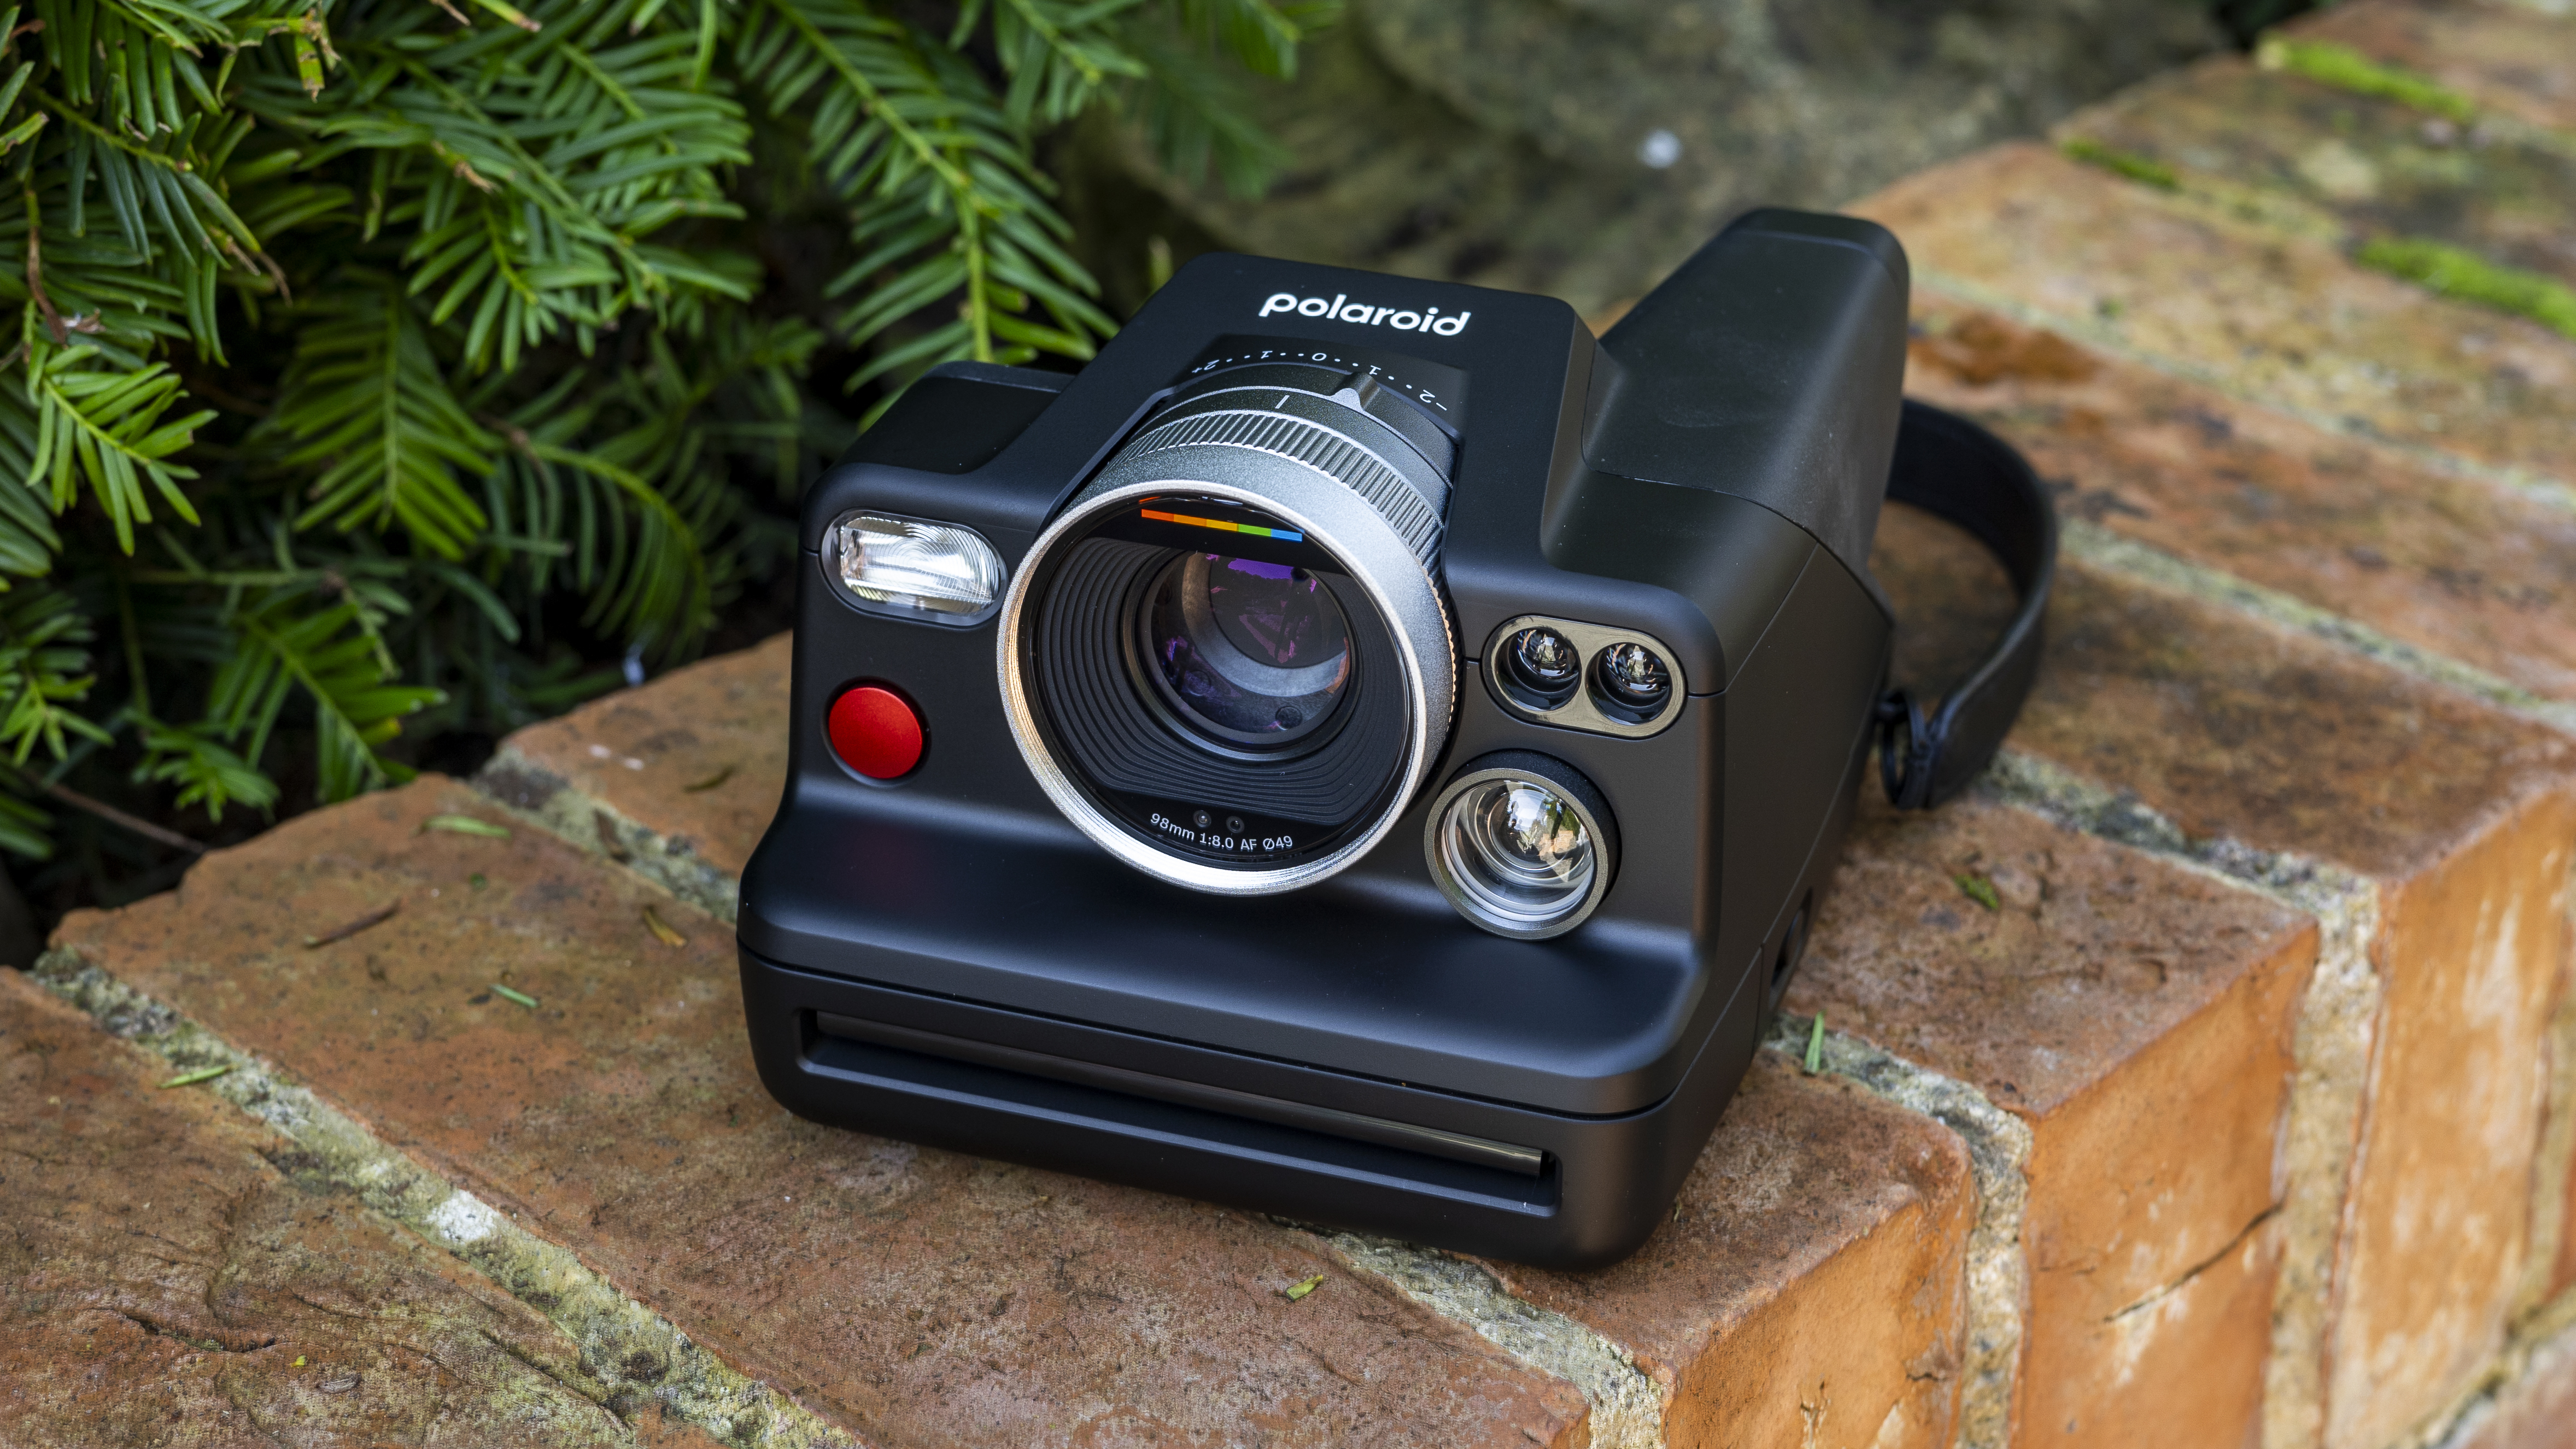 The Polaroid I-2 instant camera on a brick wall in the sunshine